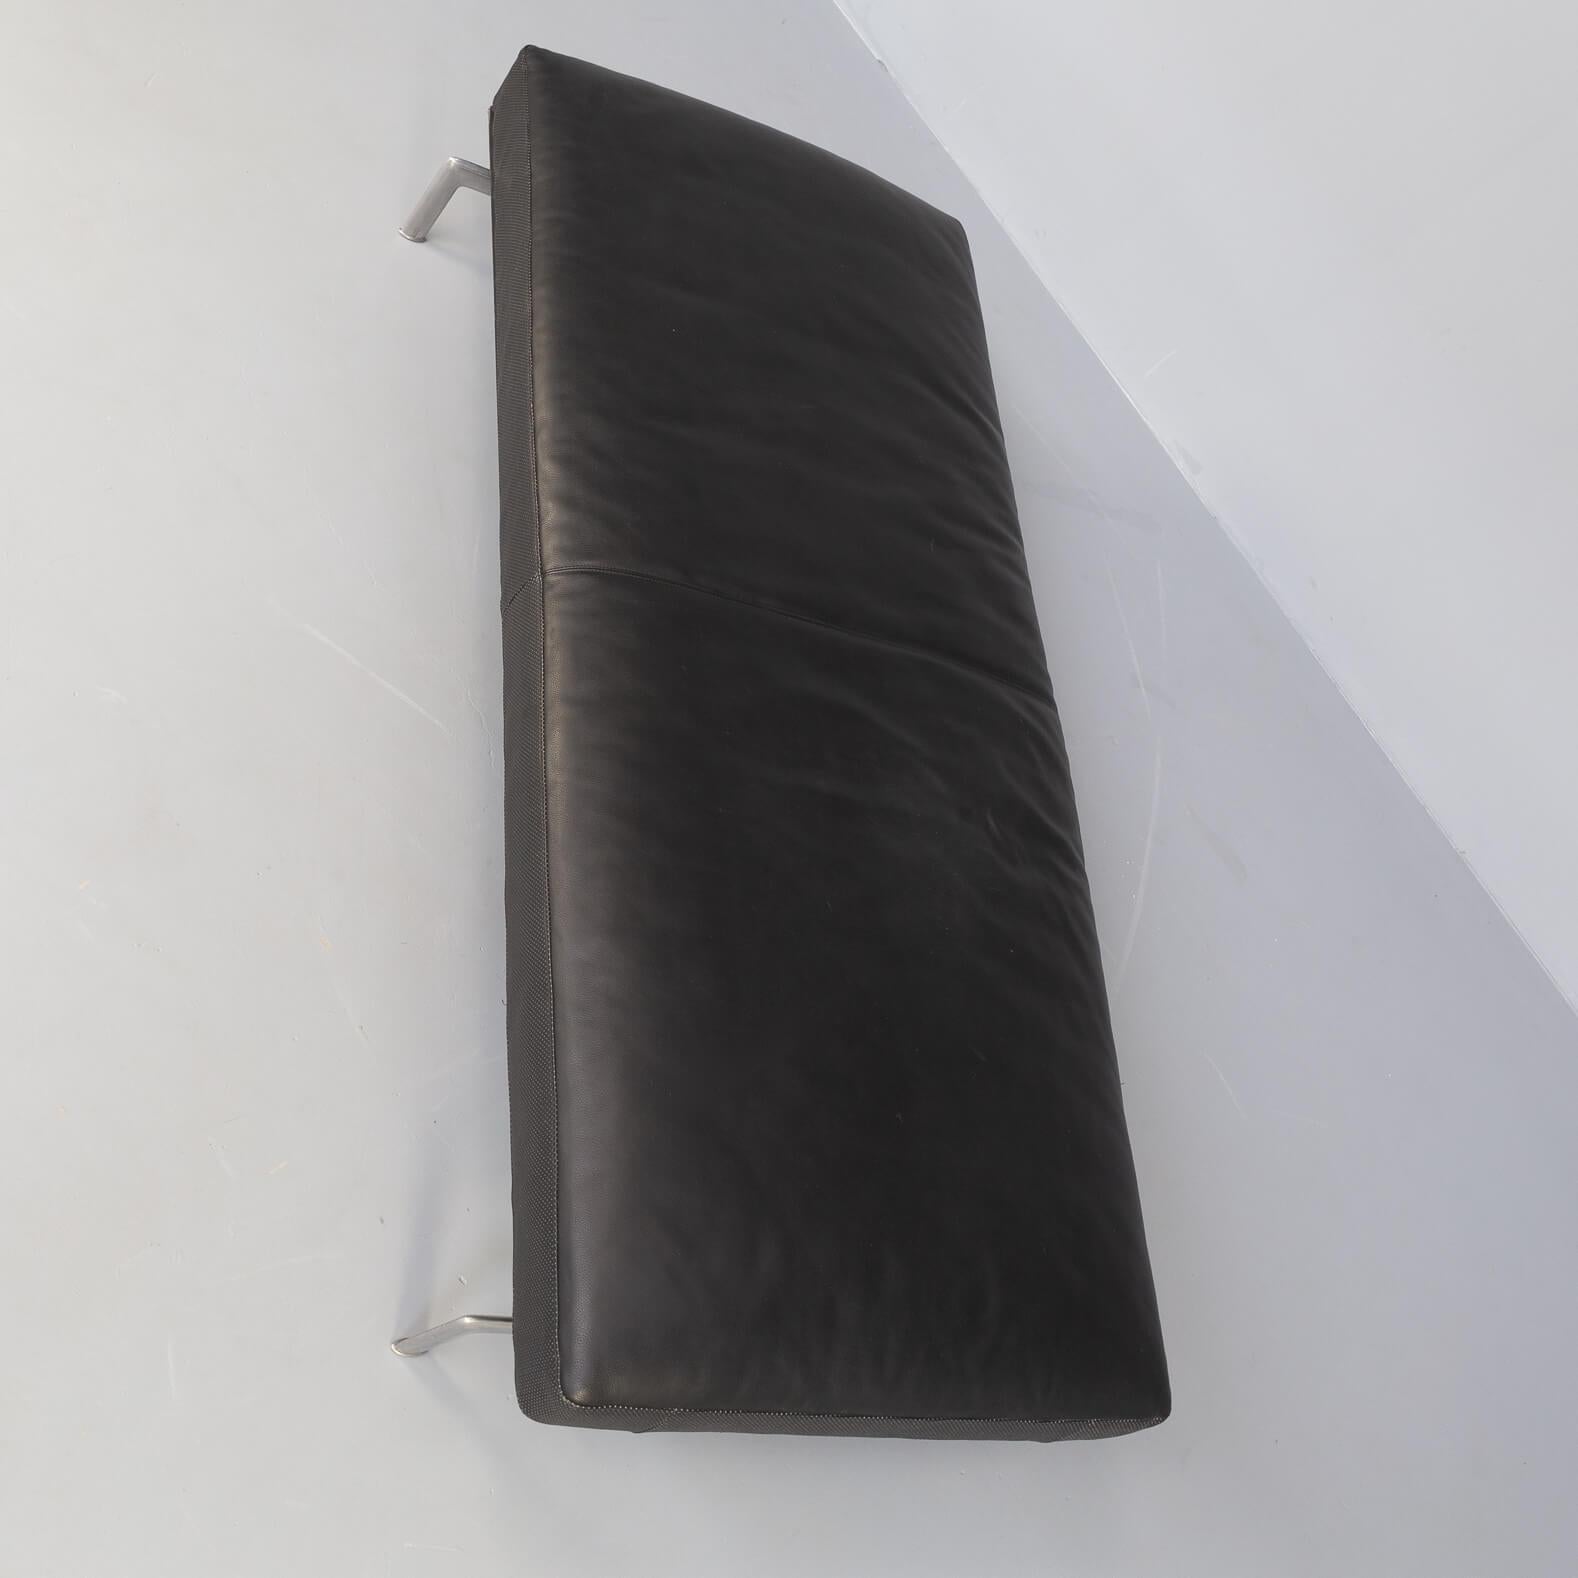 80s Antonio Citterio and Paolo Nava Black Leather “Diesis” Daybed for B&B Italia For Sale 2